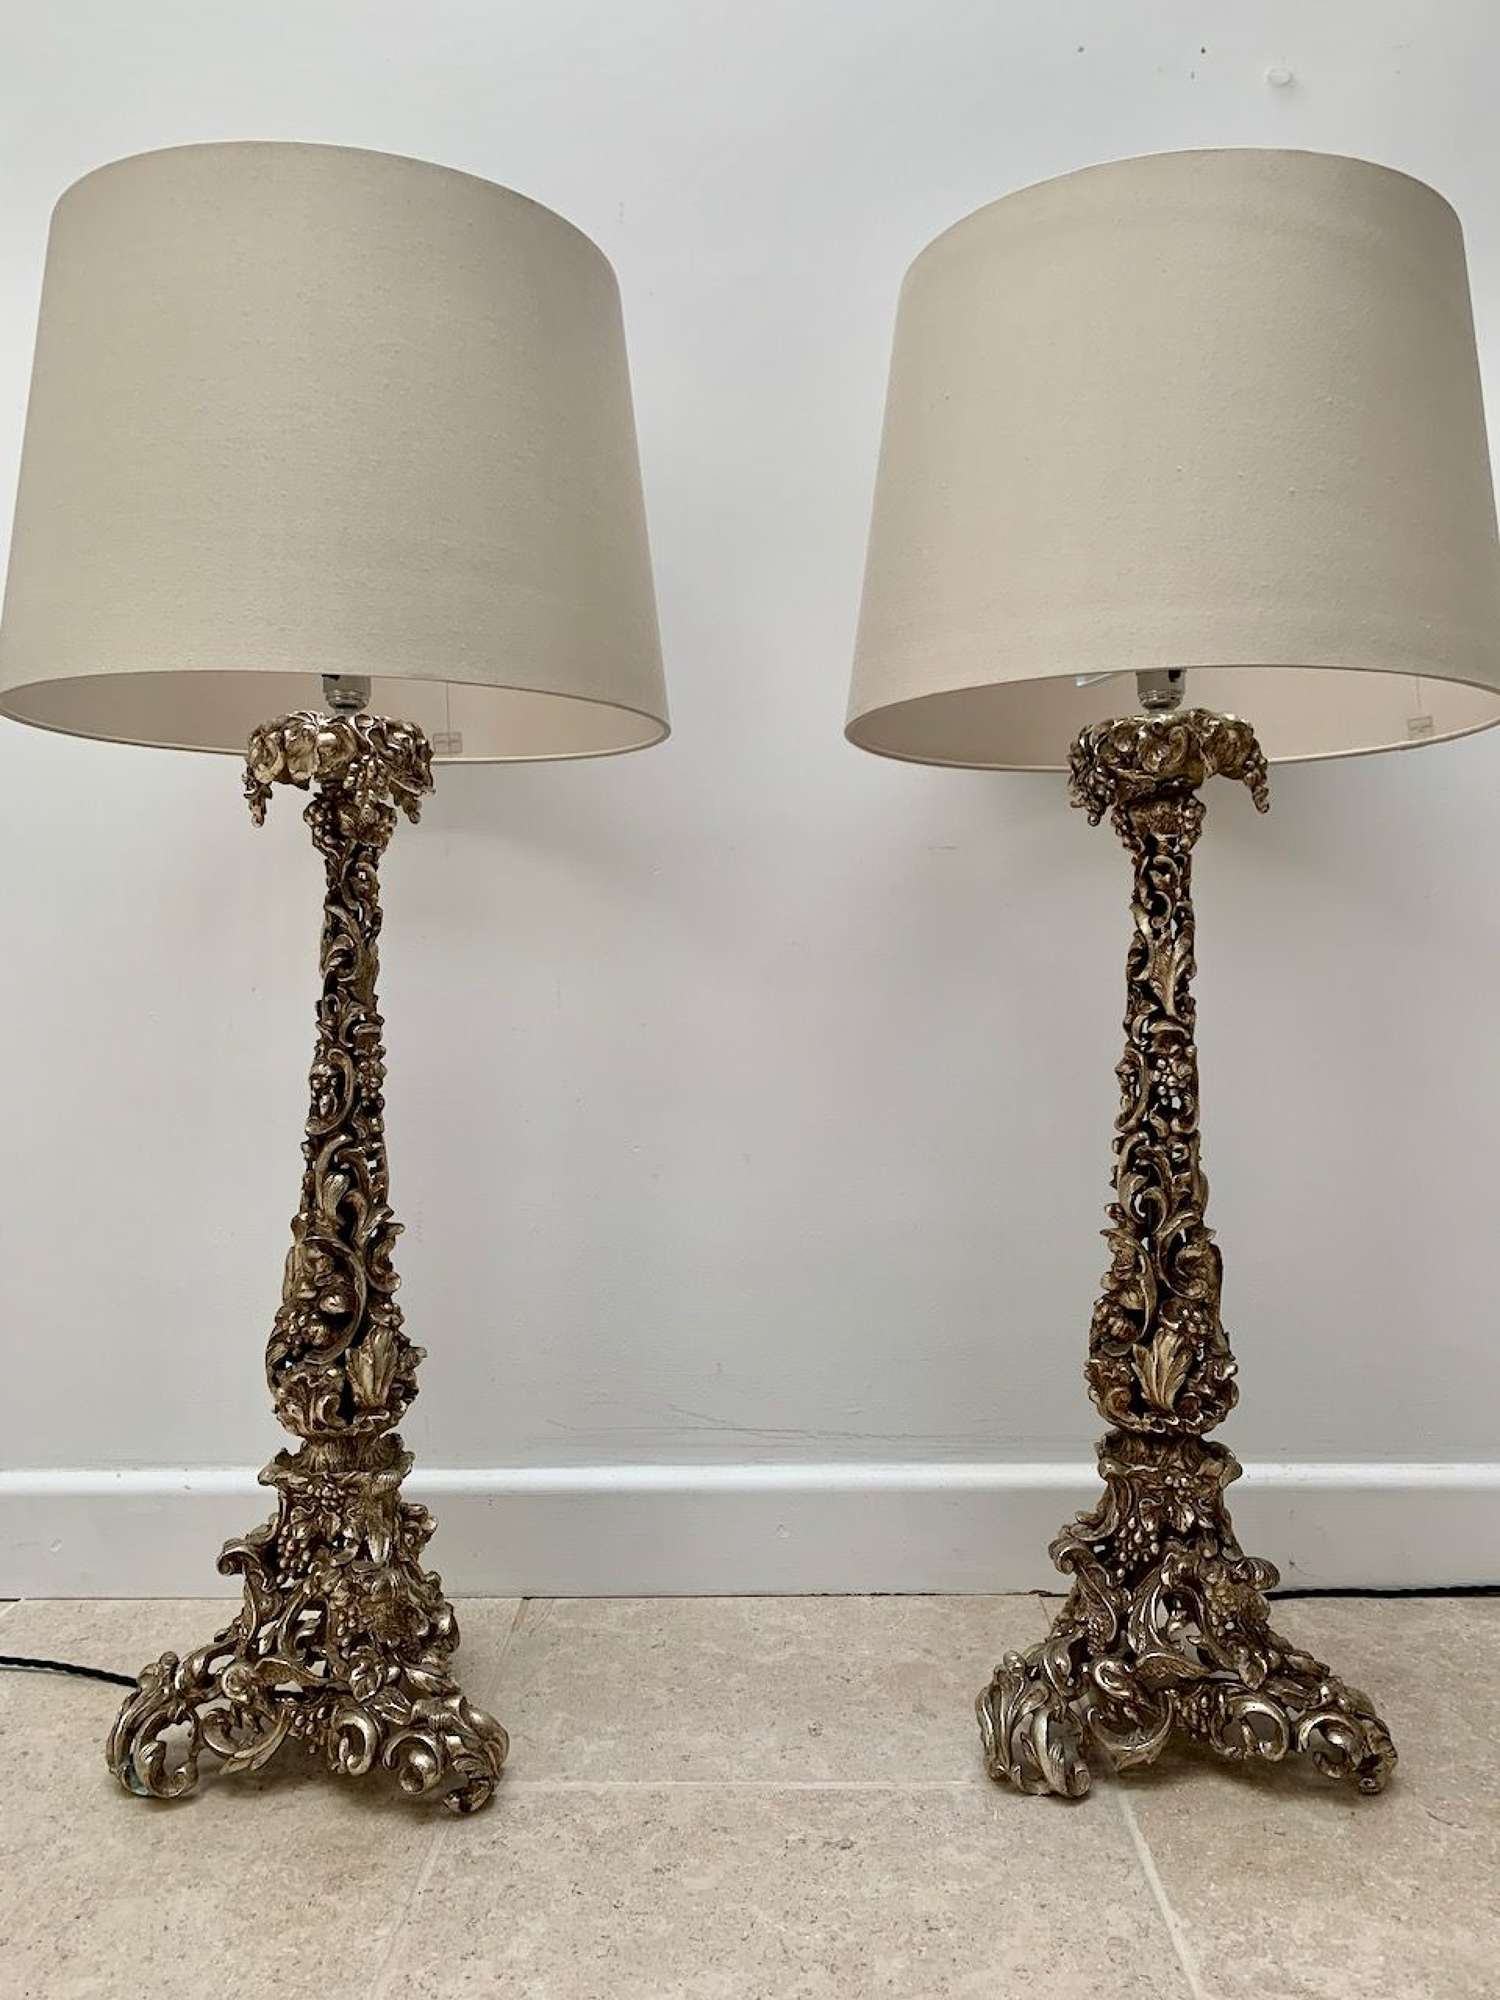 Pair of silver plated table lamps